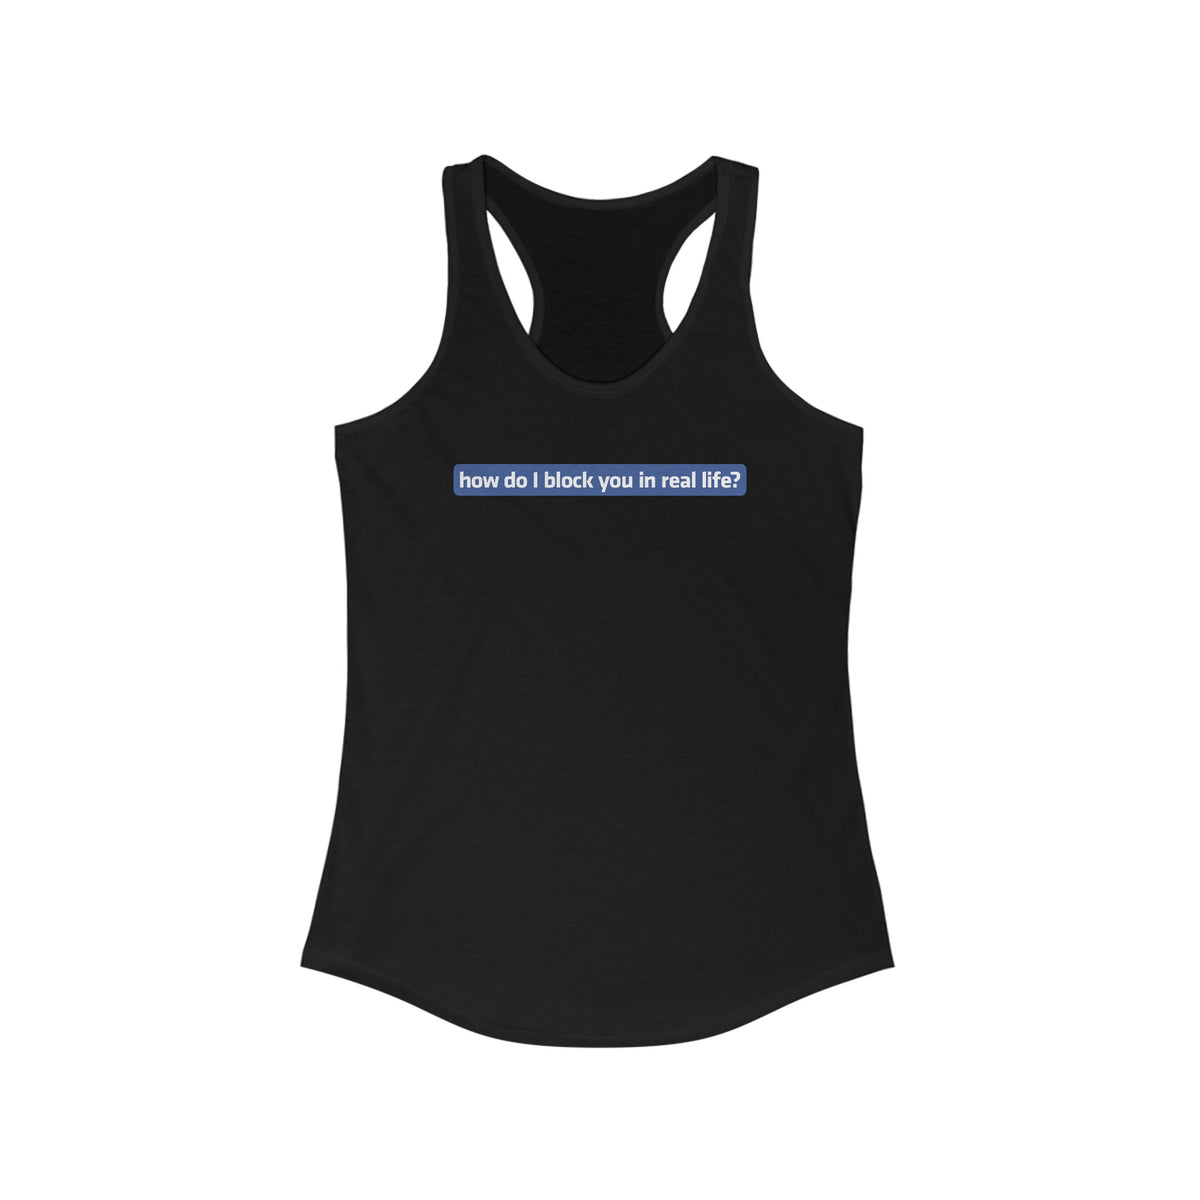 How Do I Block You In Real Life? - Women's Racerback Tank